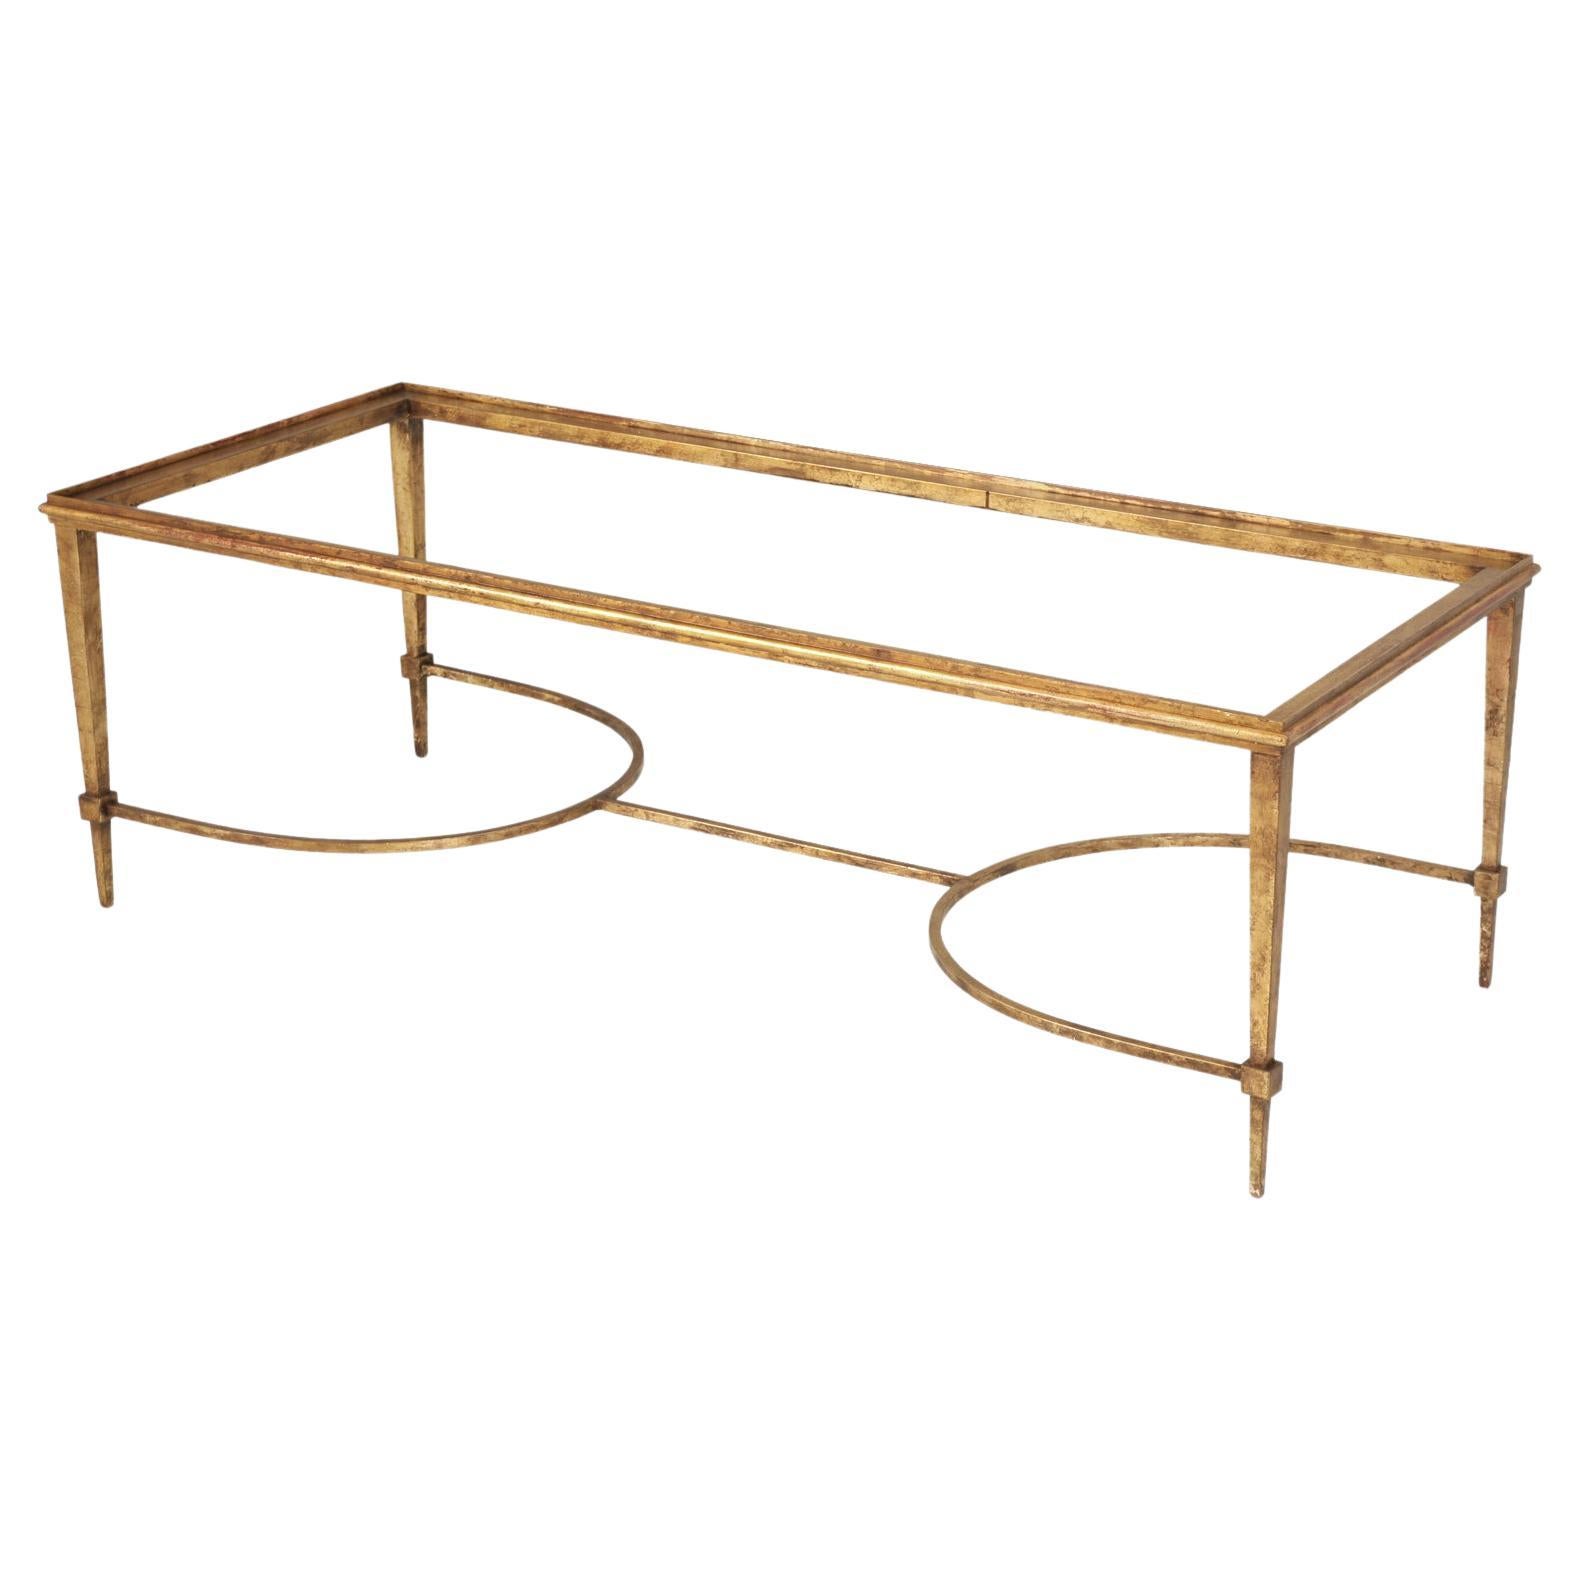 French Maison Ramsey Inspired Gilt-Iron Coffee Table Hand-Made to Order Locally